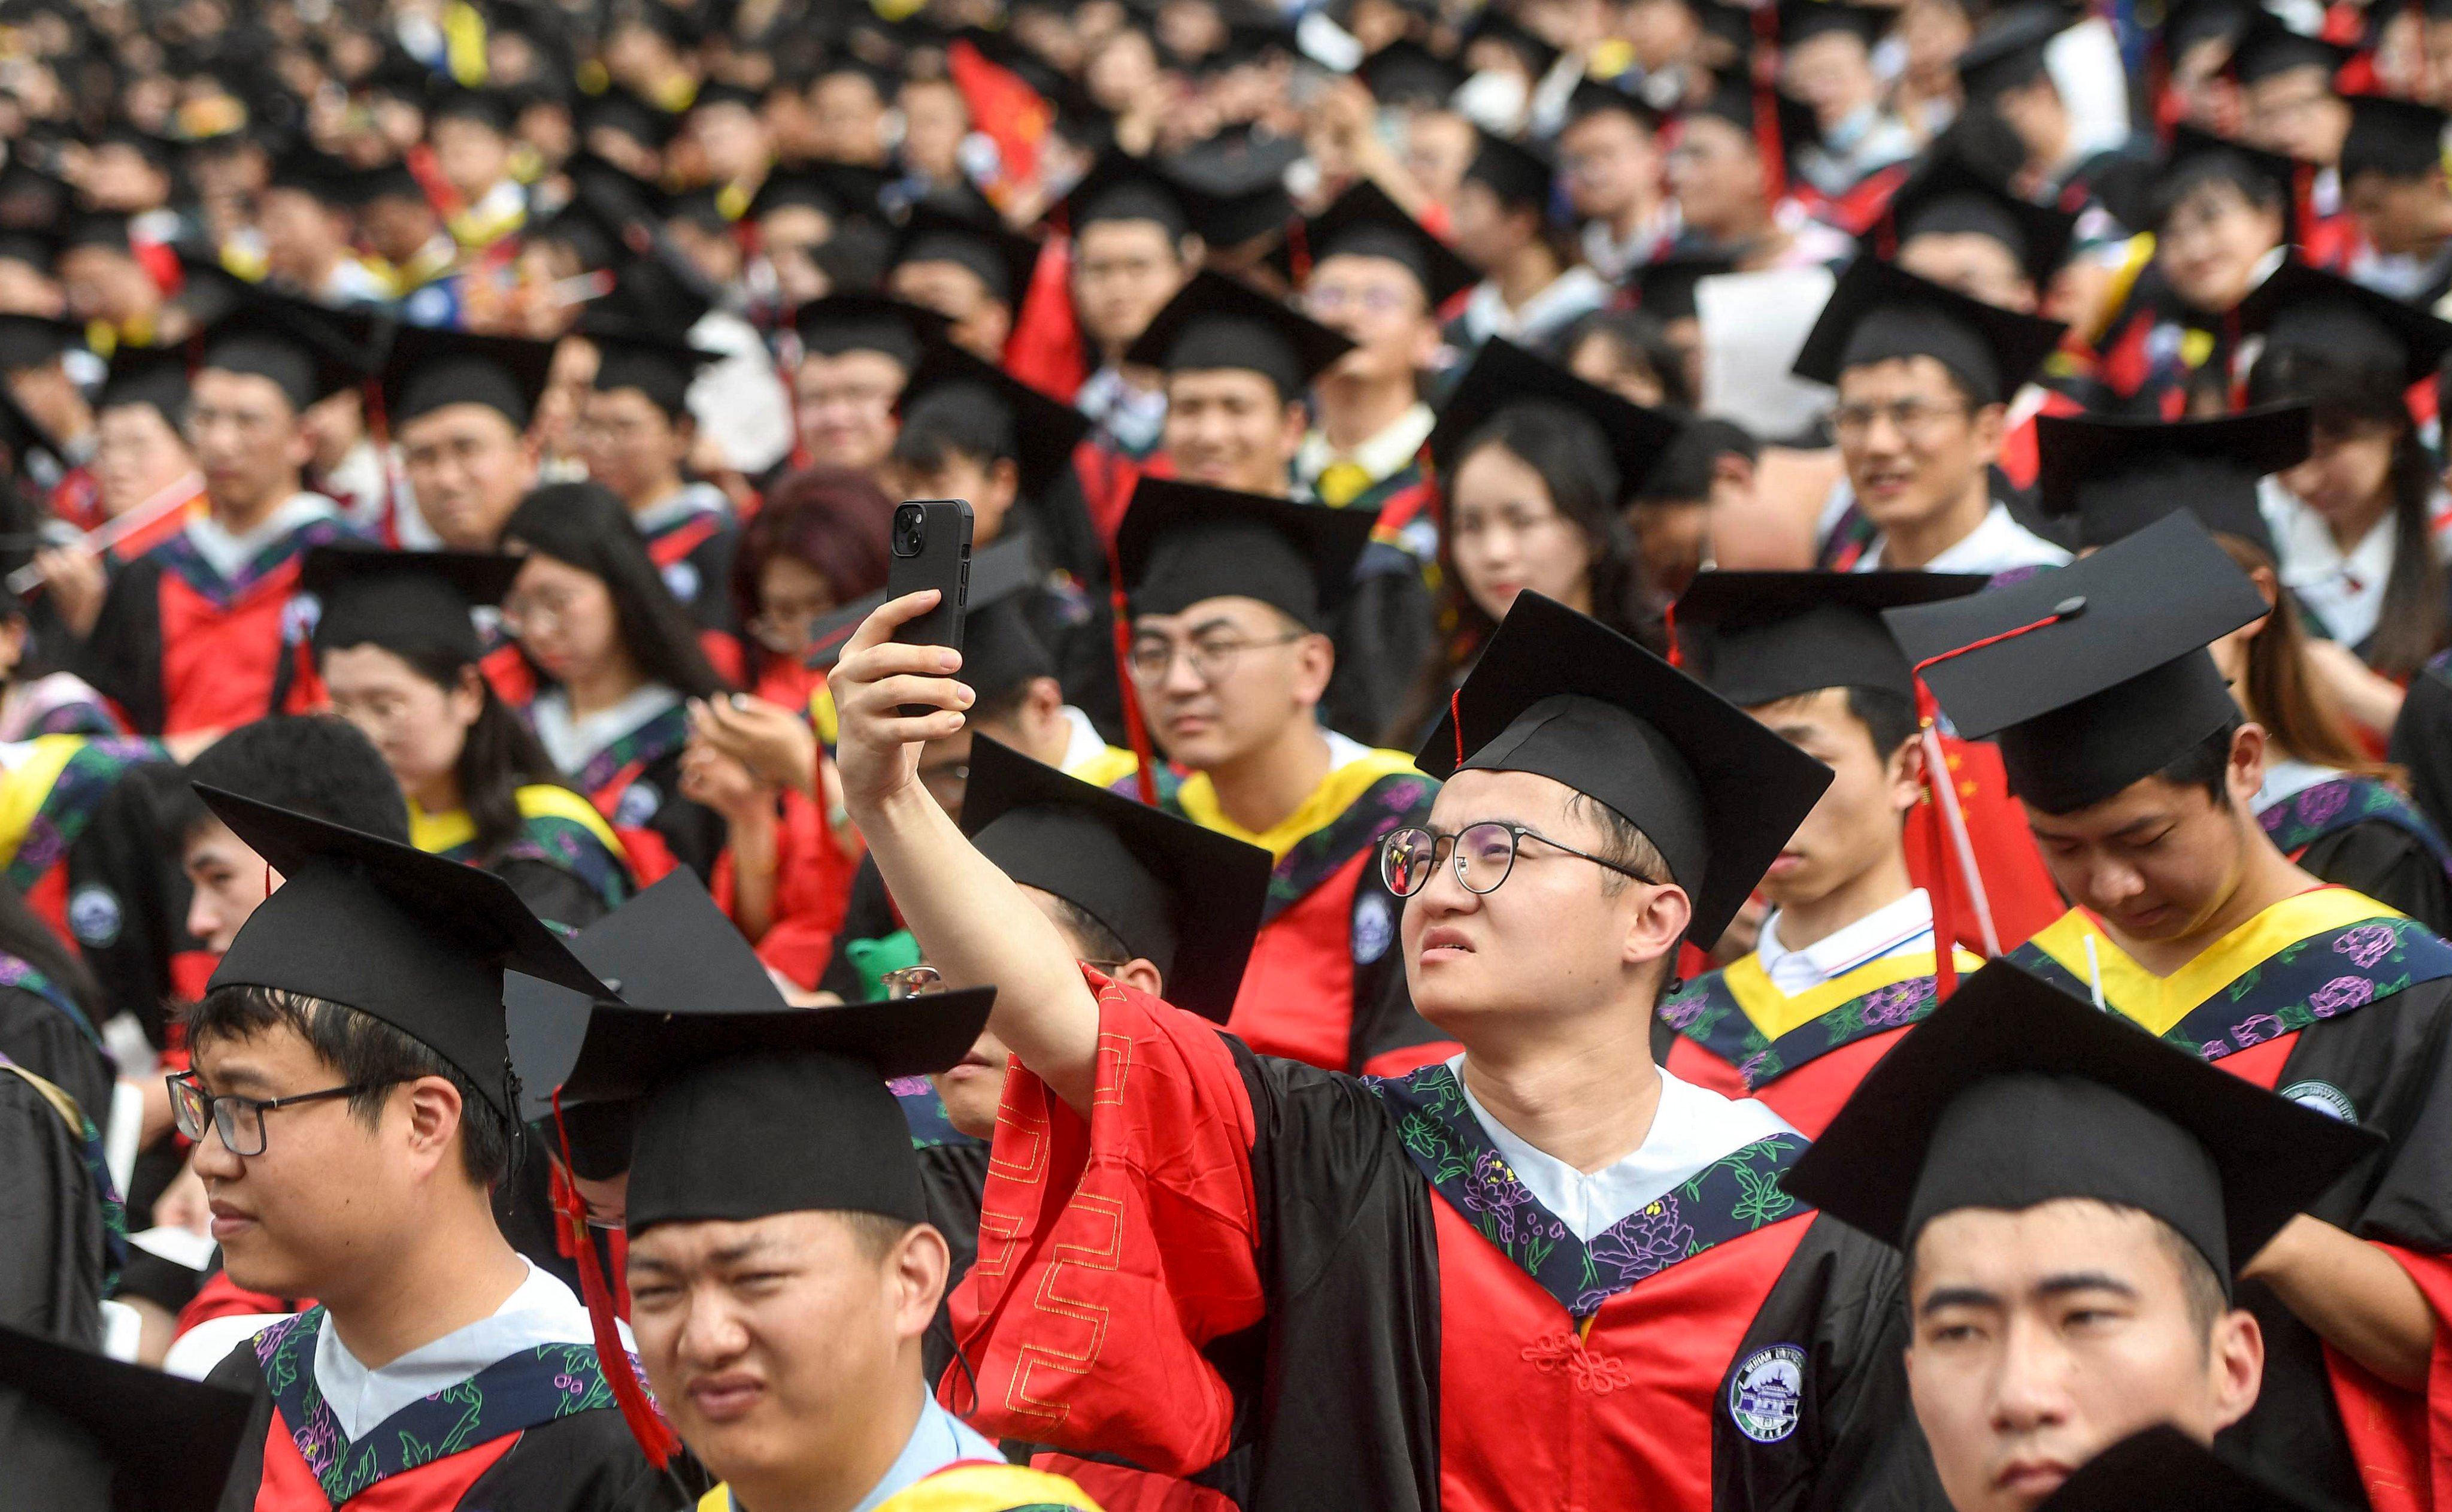 An education researcher in China says the debate around the utility of a liberal arts education may be playing out in other countries, in China the teaching of some core skills may be lacking. Photo: AFP